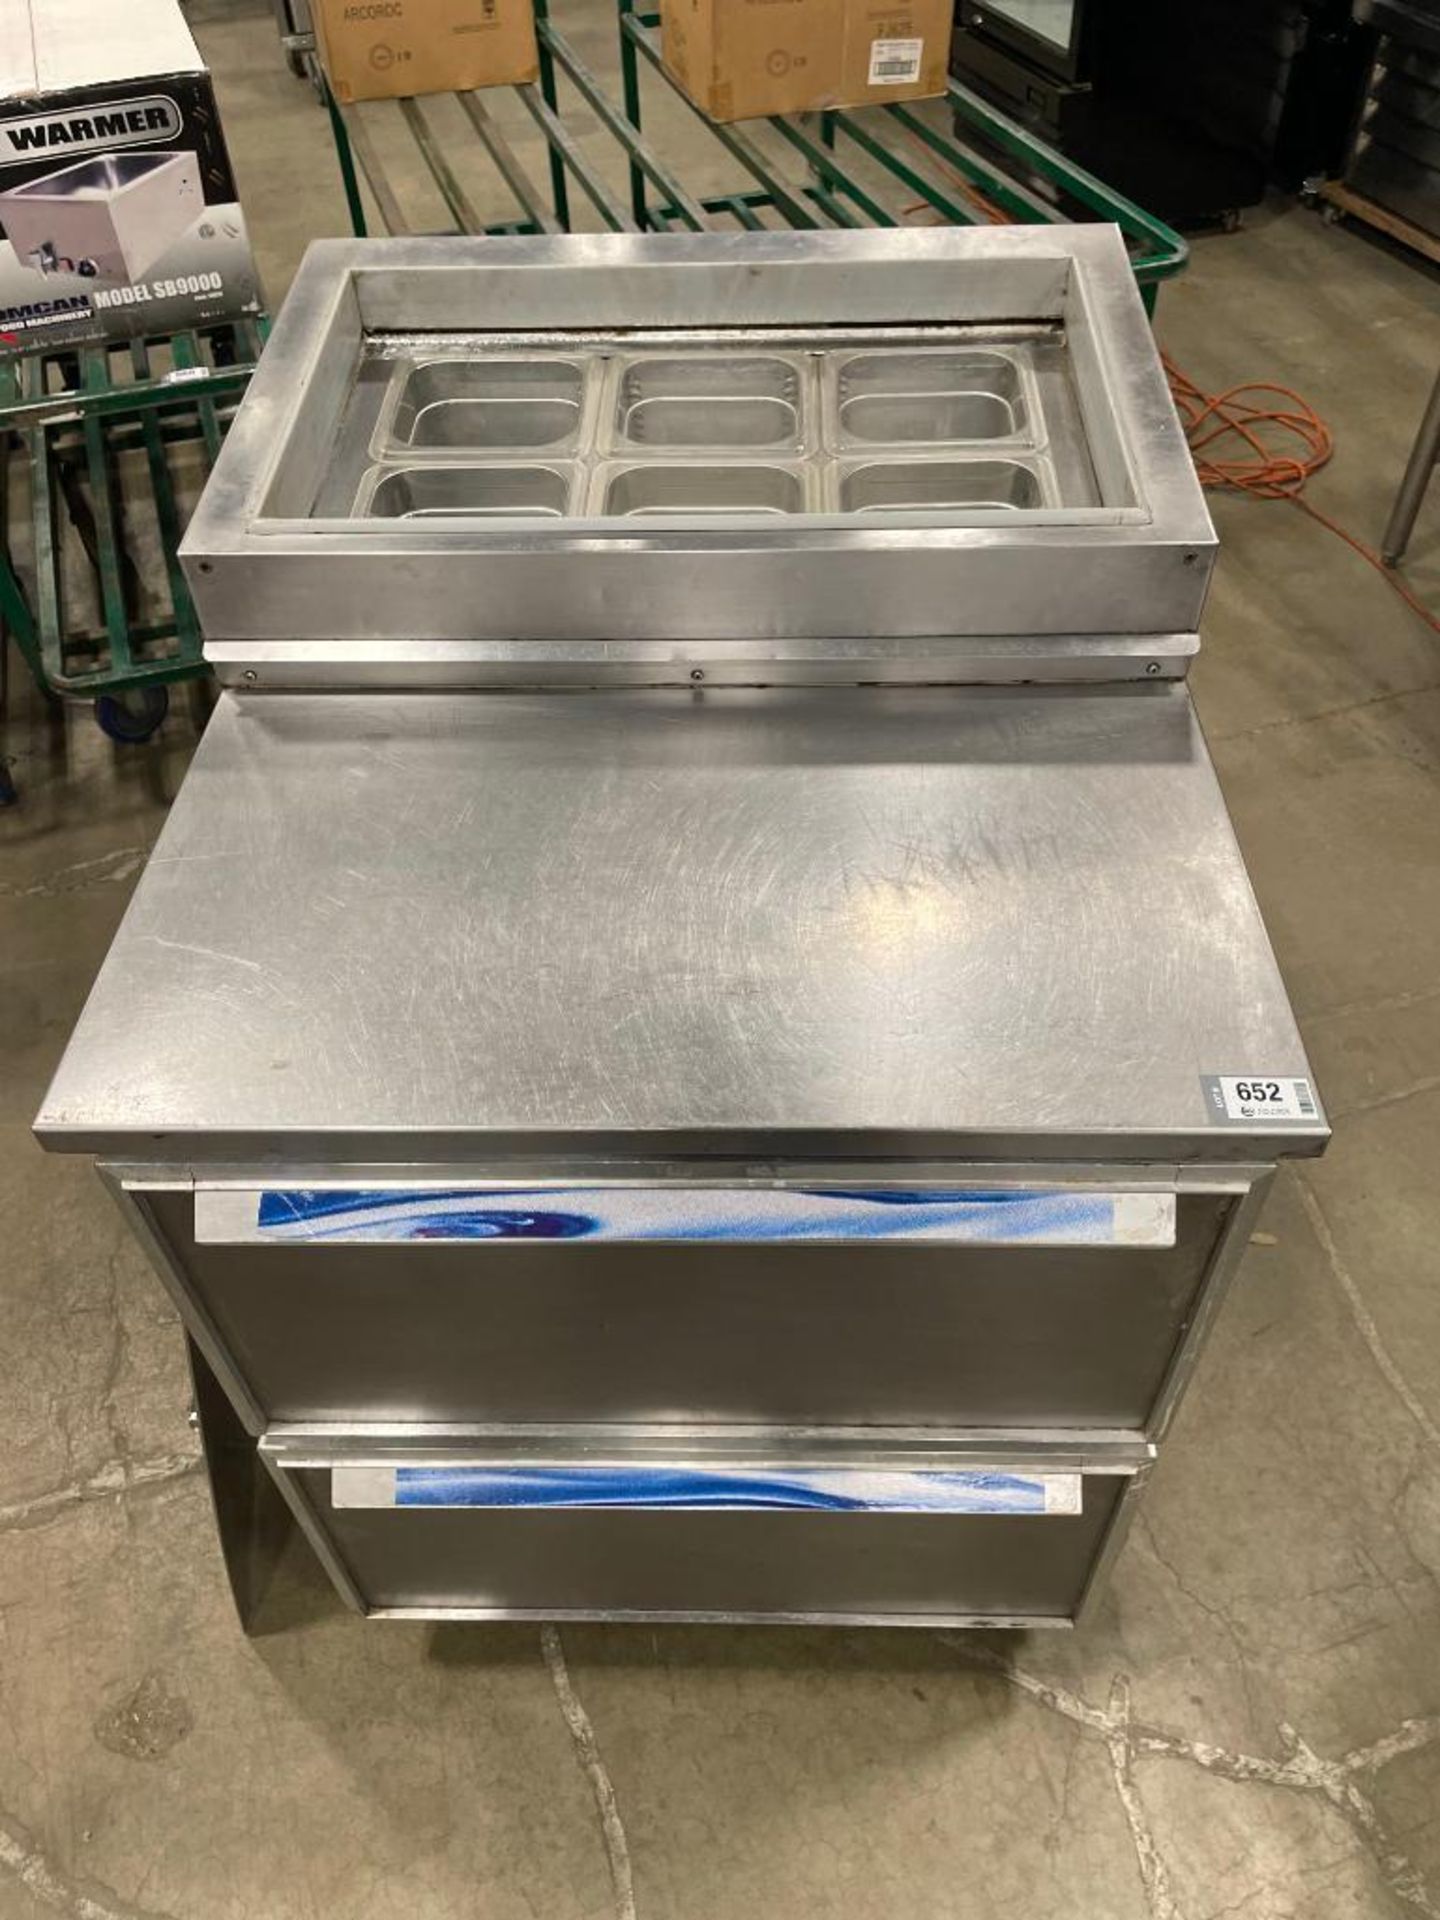 SILVERKING SKPZ27D 2-DRAWER REFRIGERATED PREP TABLE - Image 9 of 10